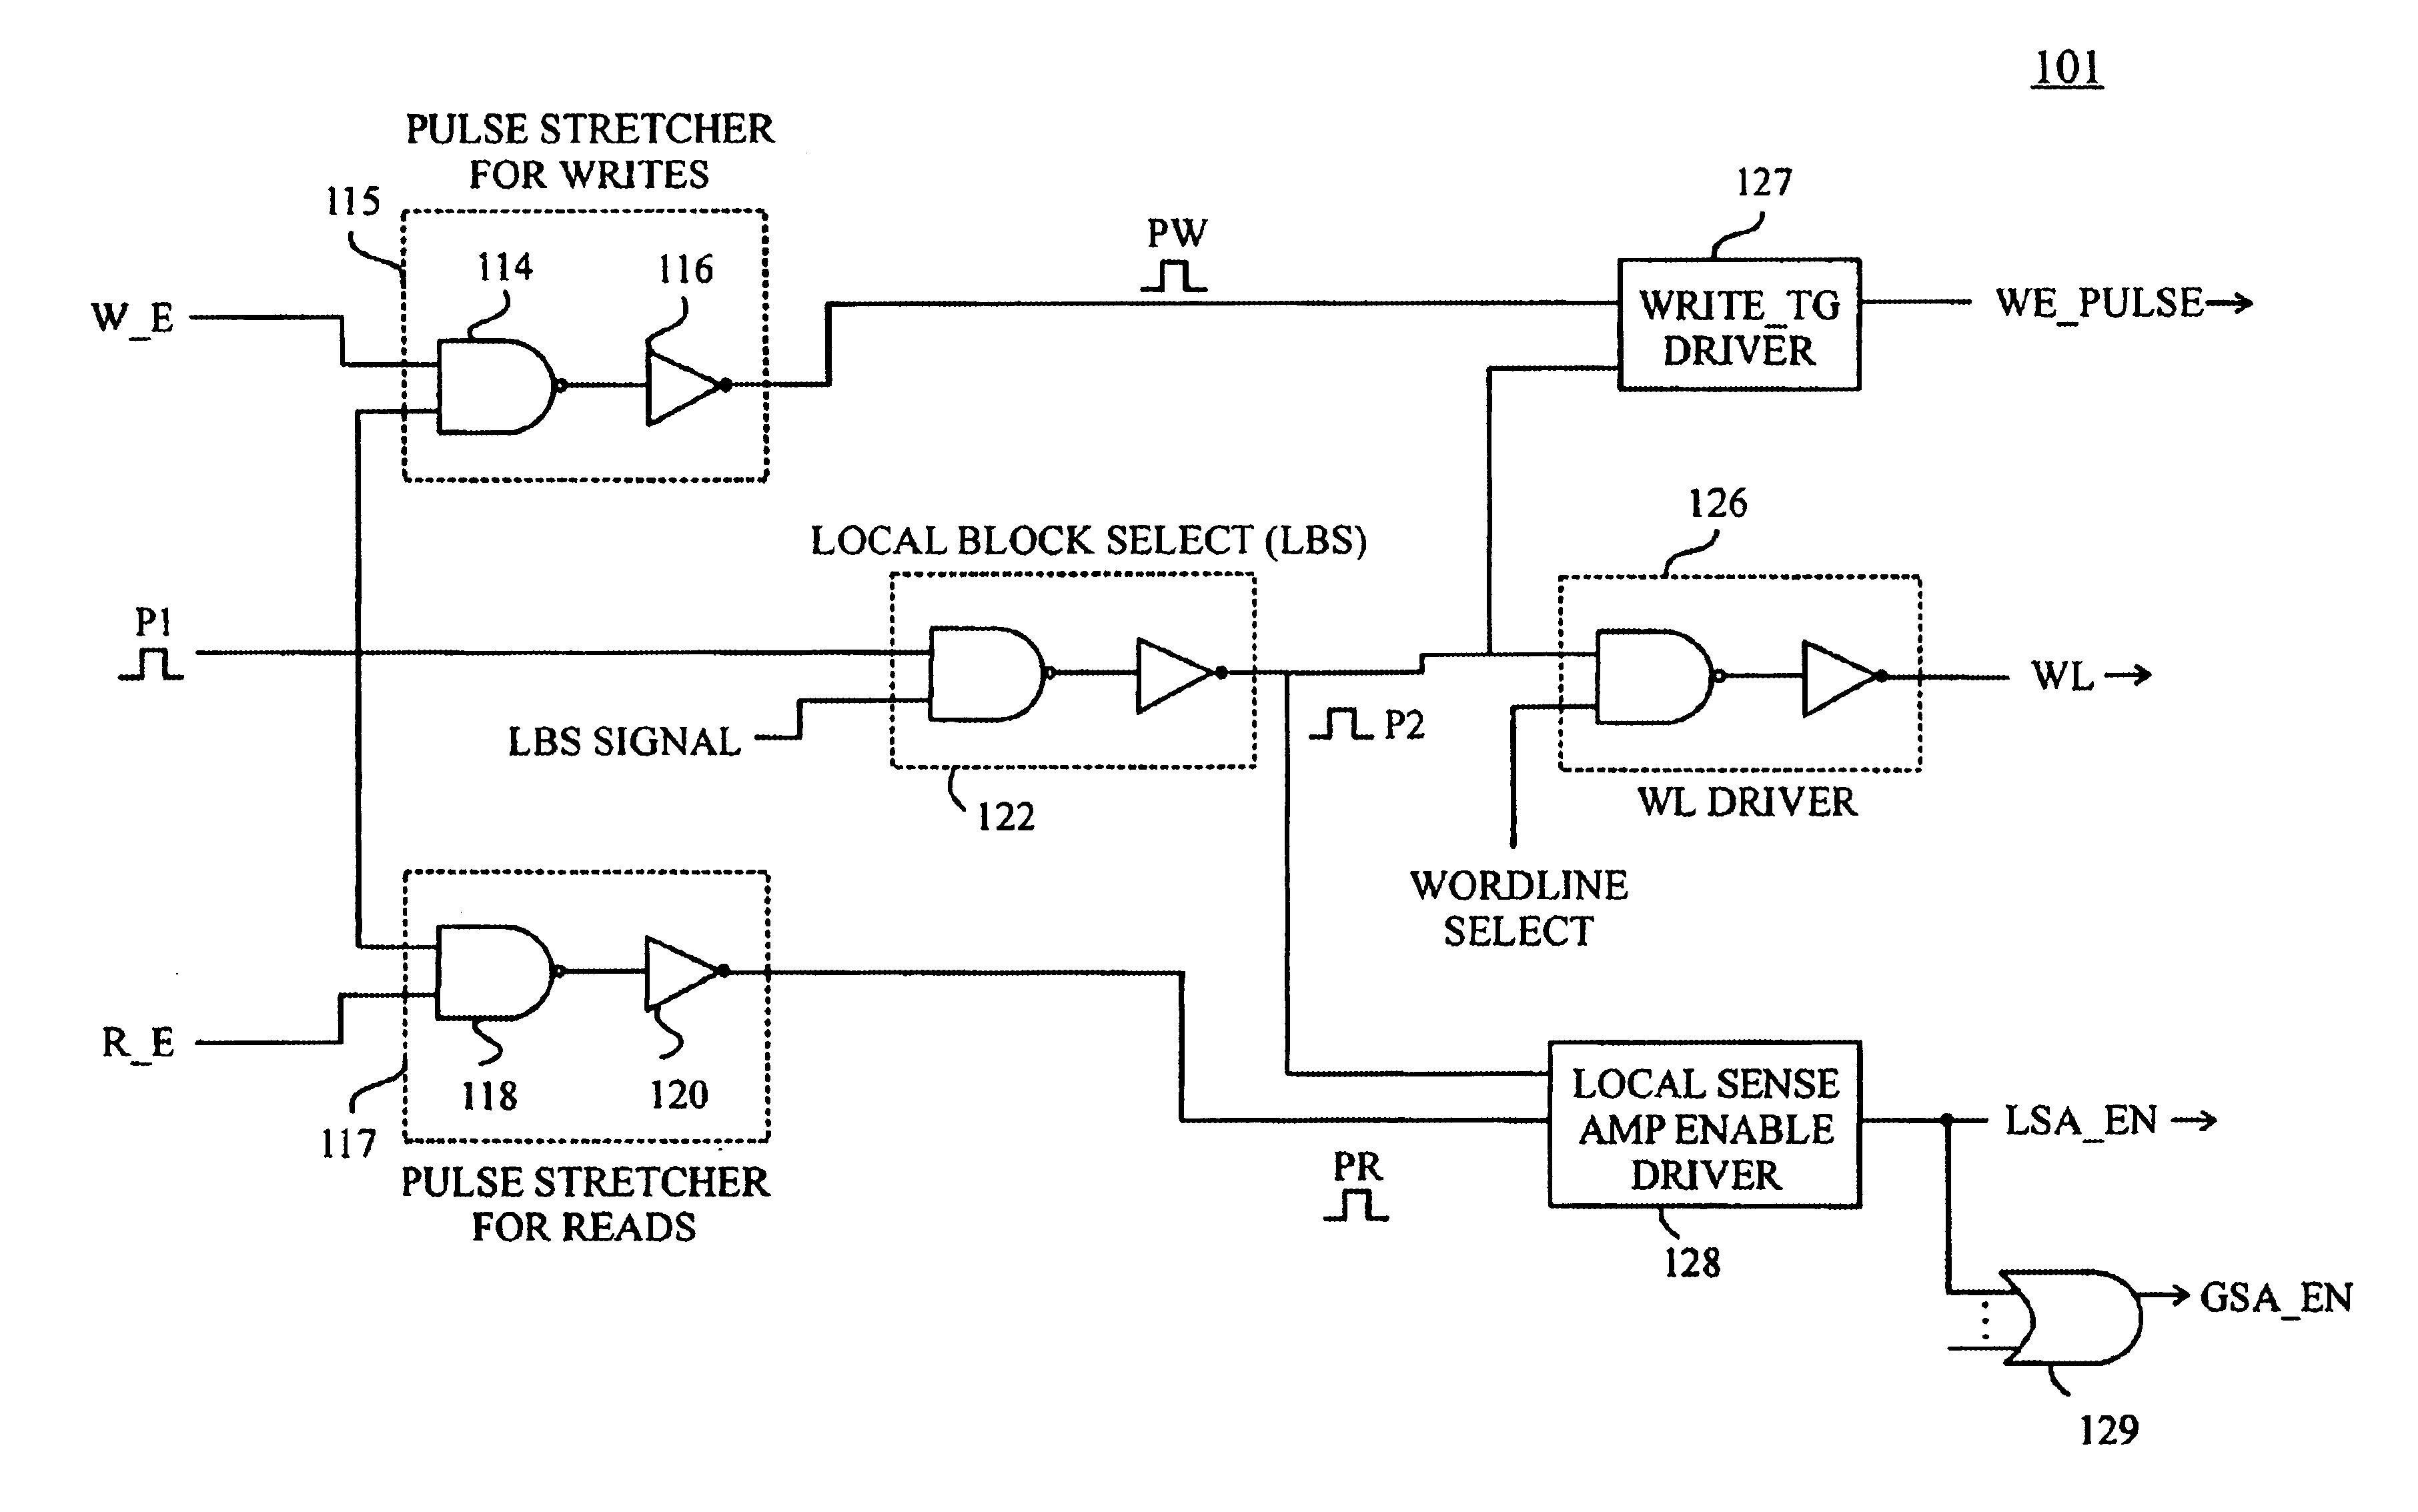 Decode path gated low active power SRAM